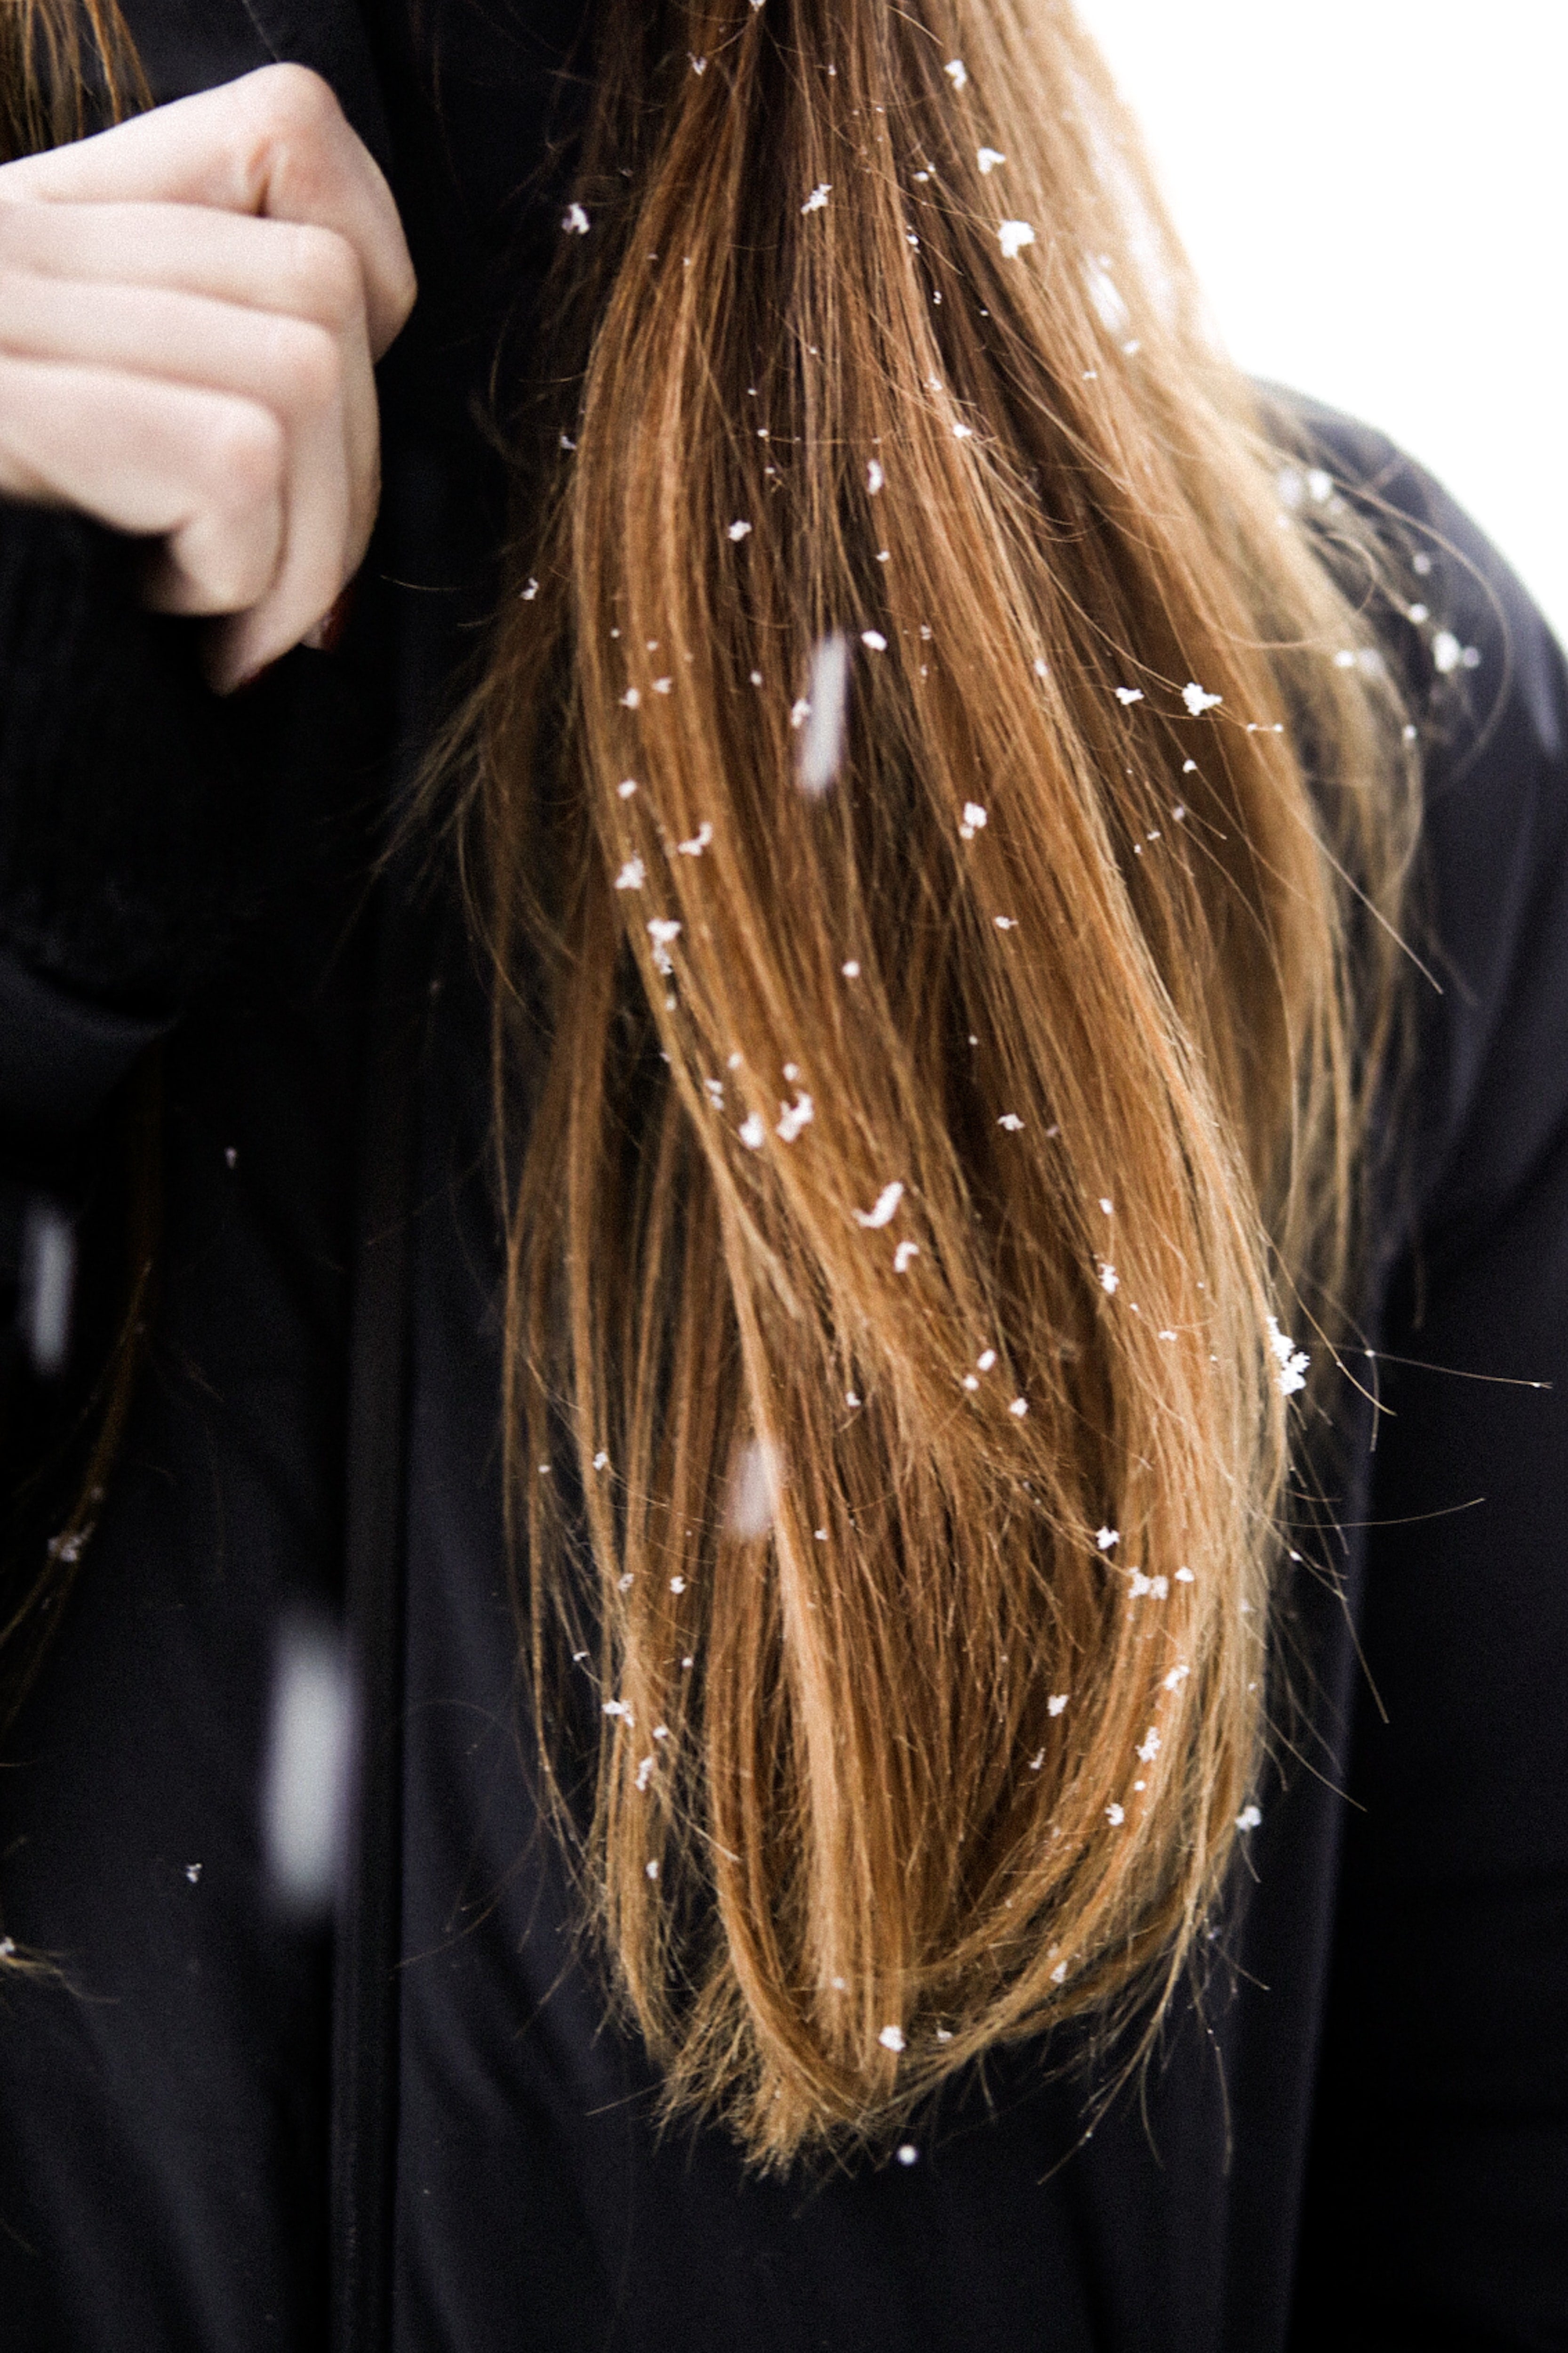 Covid and Winter, factors in hair loss?